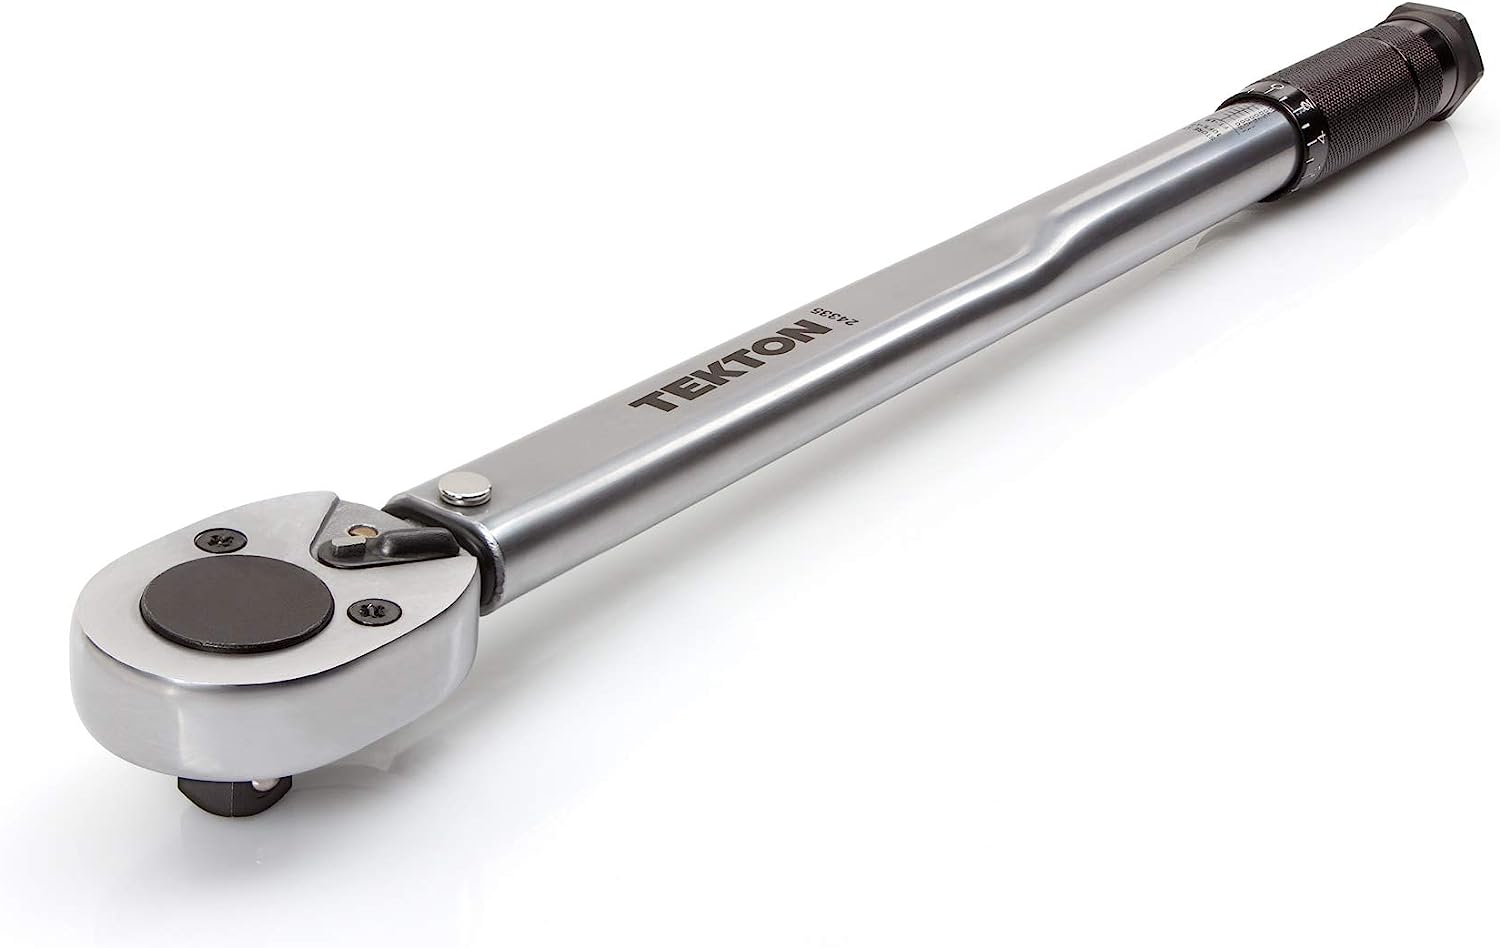 TEKTON 24335 12-Inch Drive Click Torque Wrench Review